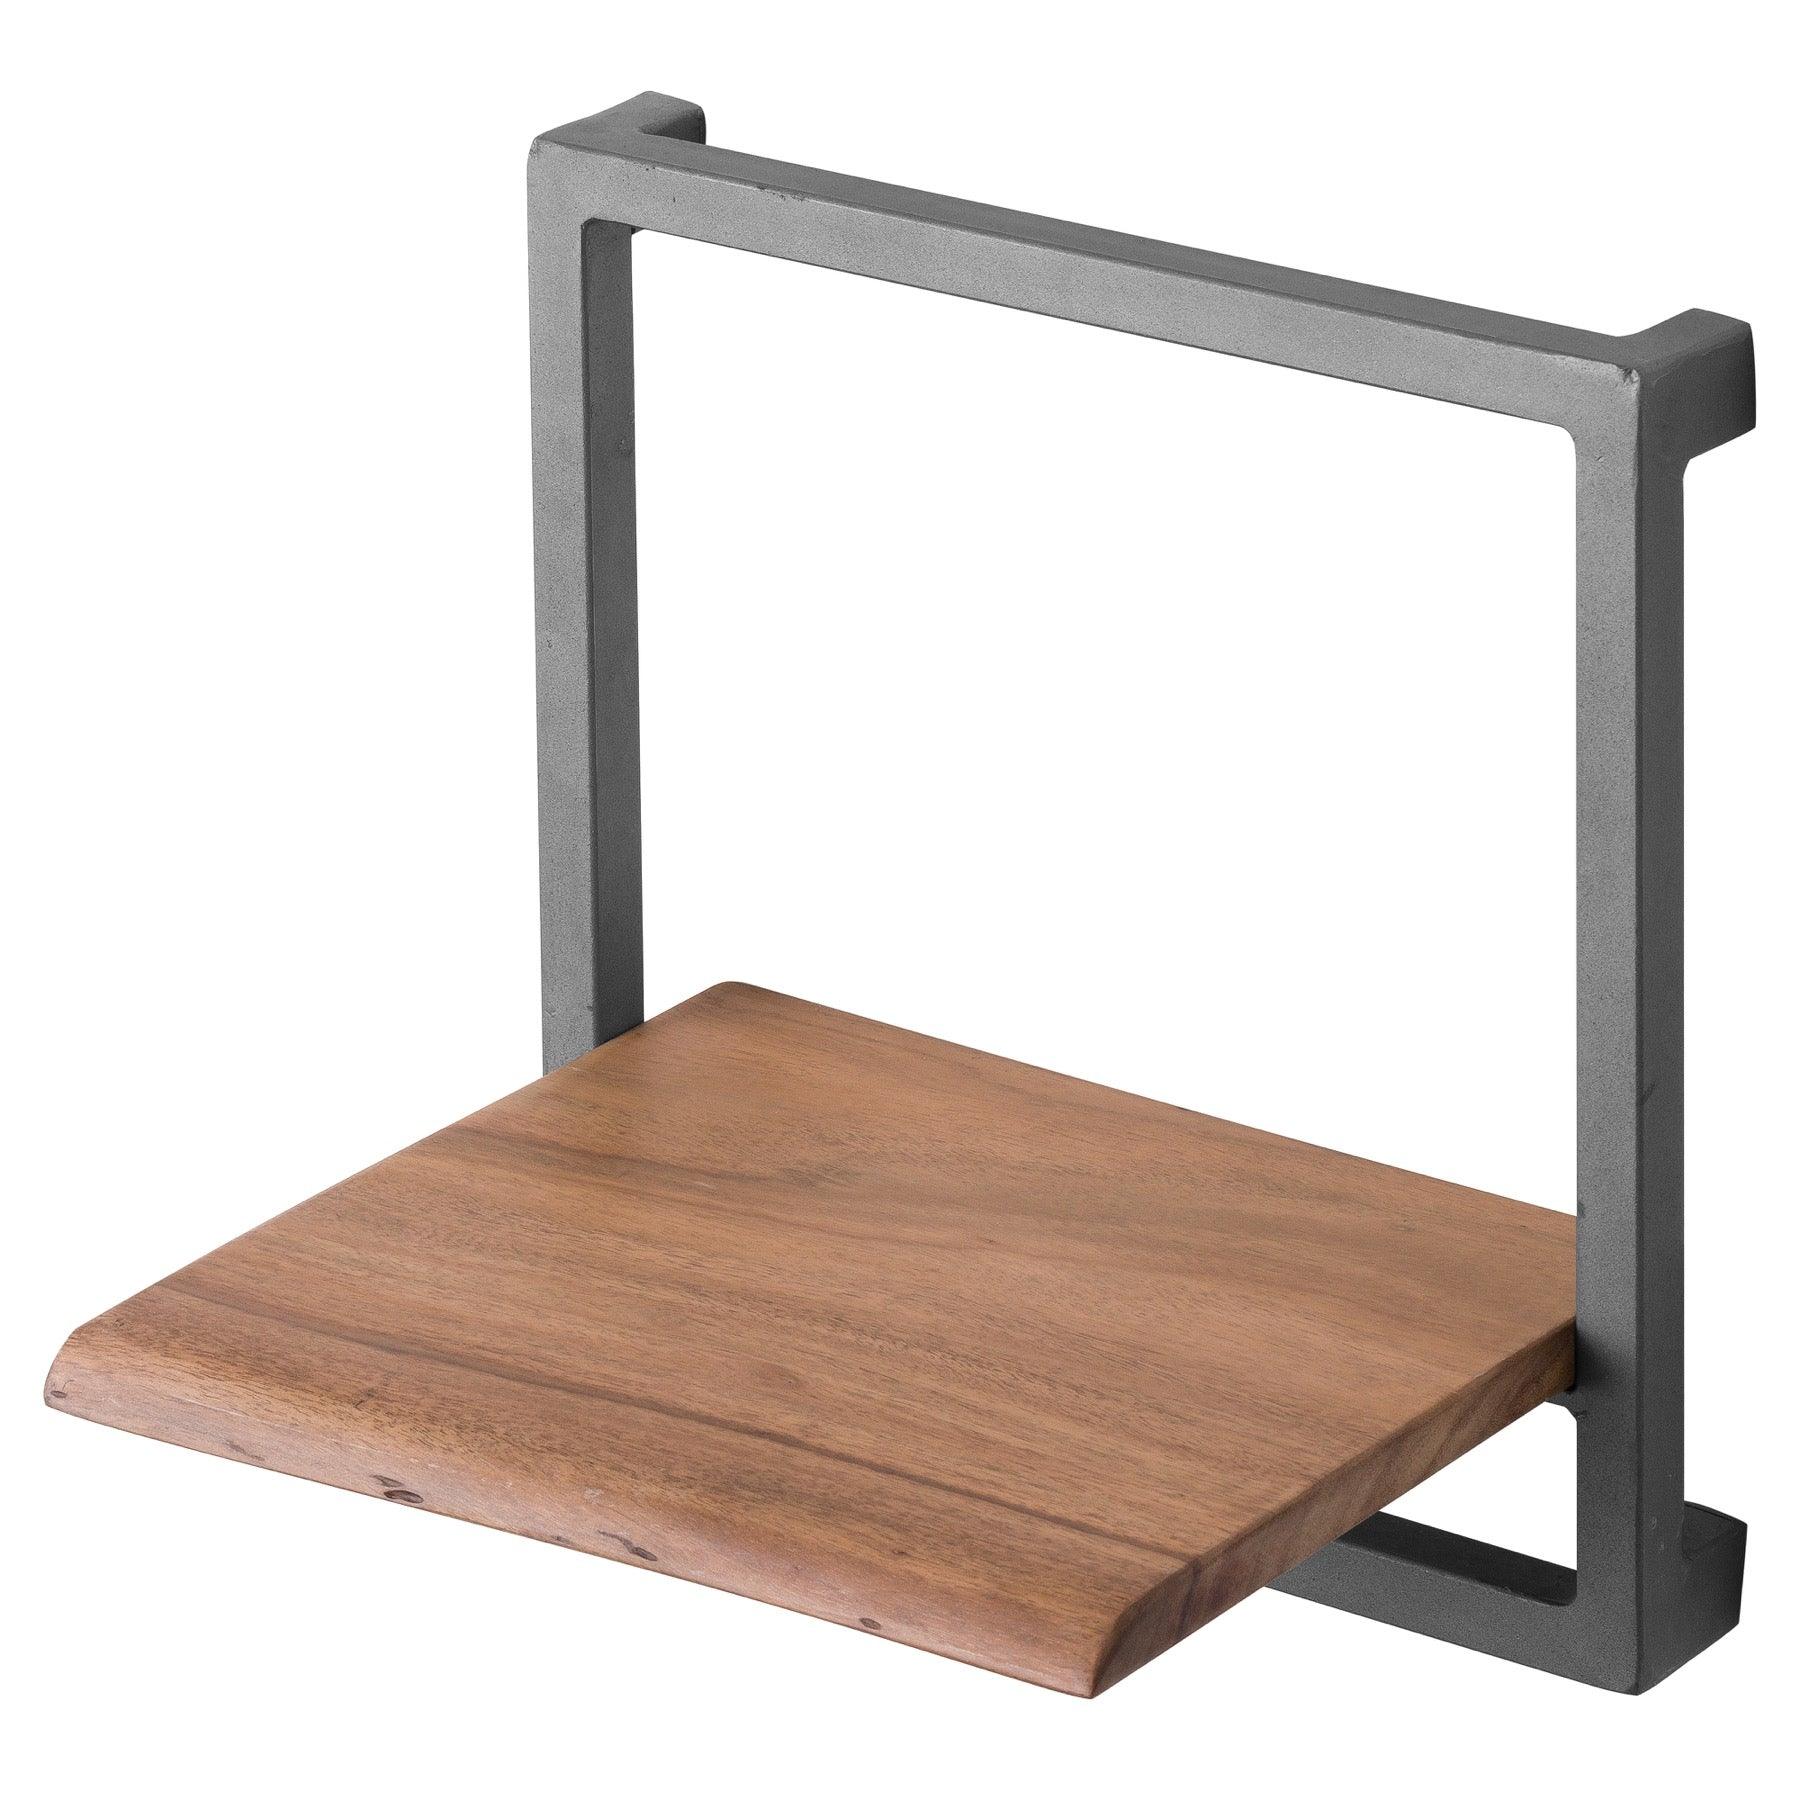 Live Edge Collection Square Shelf - Vookoo Lifestyle